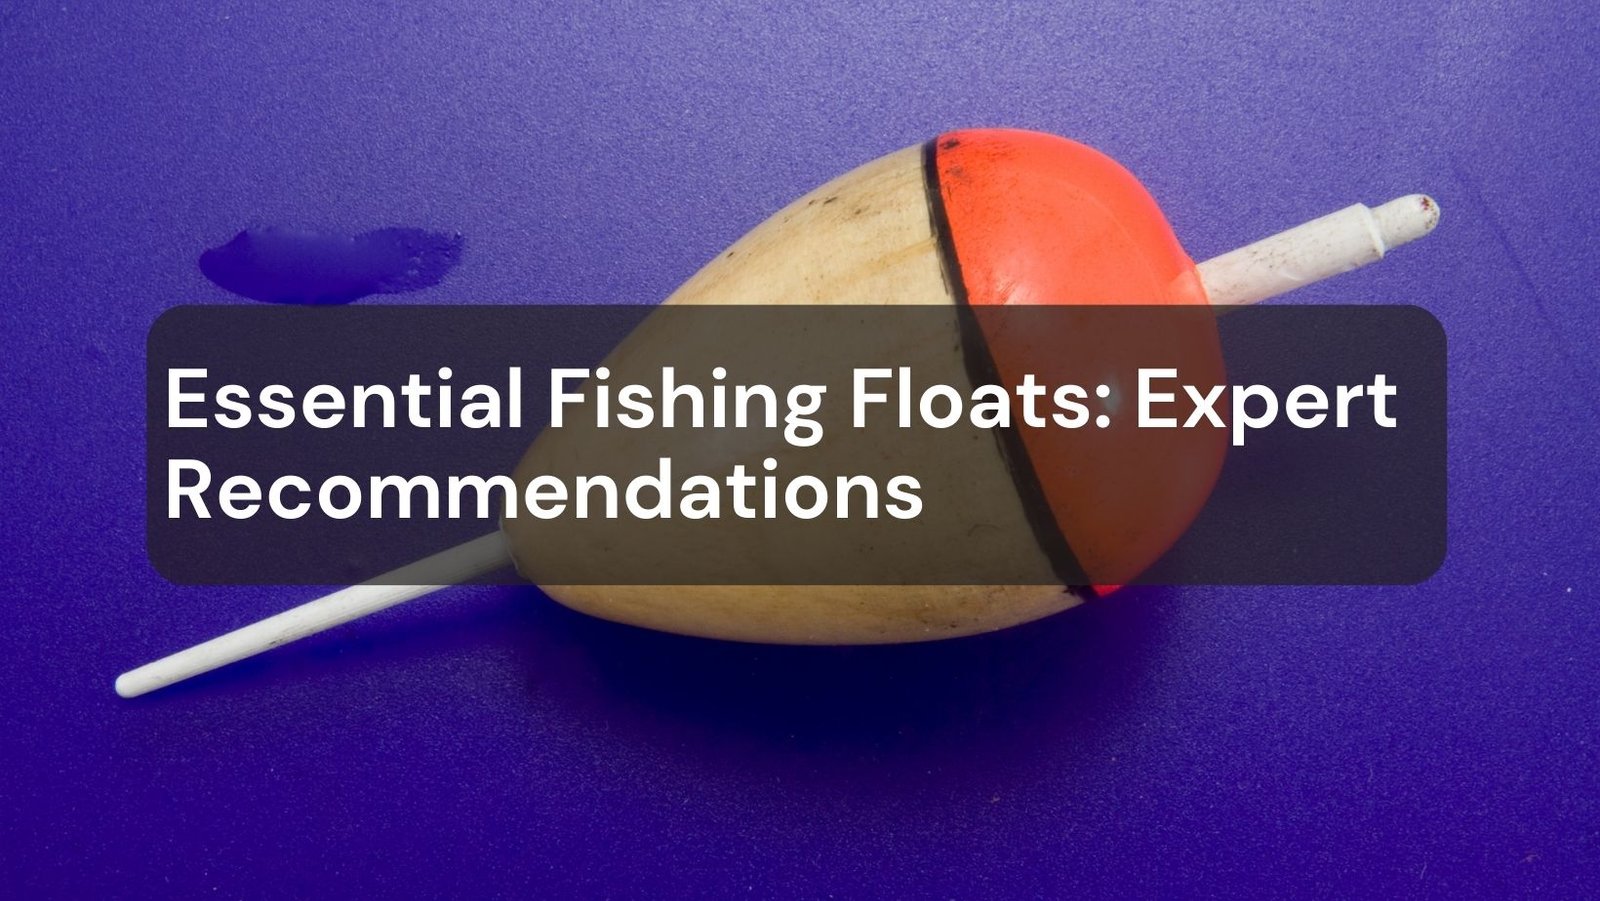 Essential Fishing Floats: Expert Recommendations